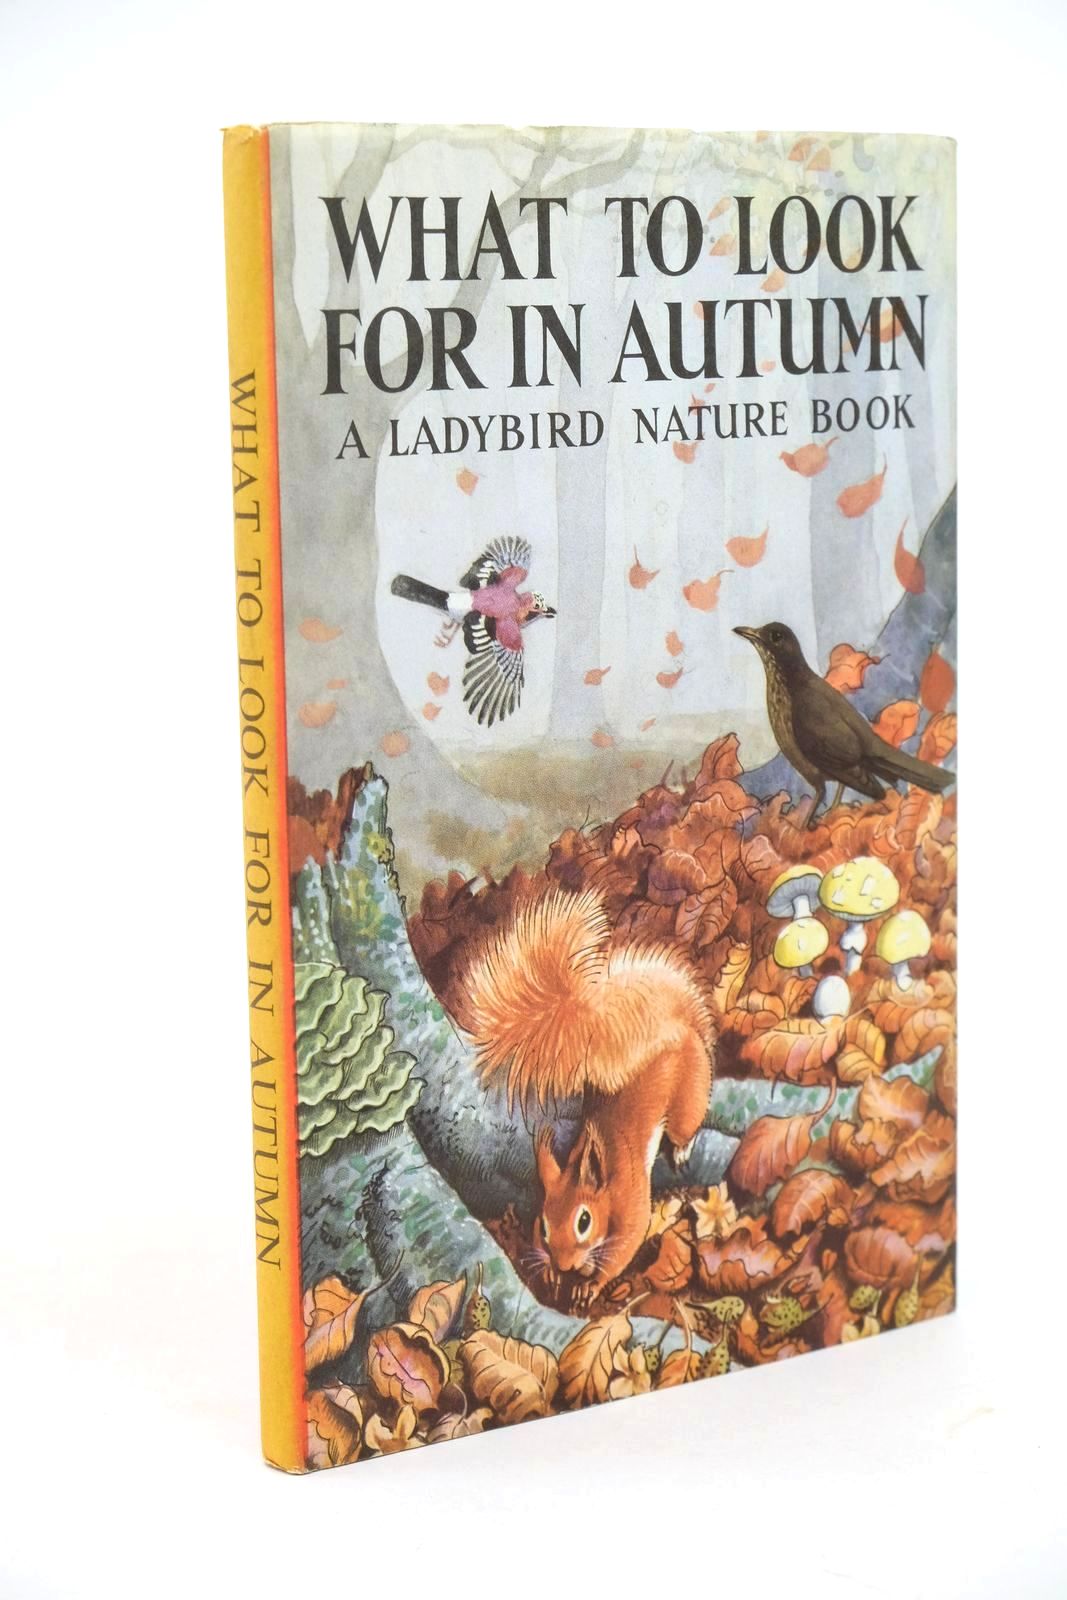 Photo of WHAT TO LOOK FOR IN AUTUMN written by Watson, E.L. Grant illustrated by Tunnicliffe, C.F. published by Wills &amp; Hepworth Ltd. (STOCK CODE: 1323147)  for sale by Stella & Rose's Books